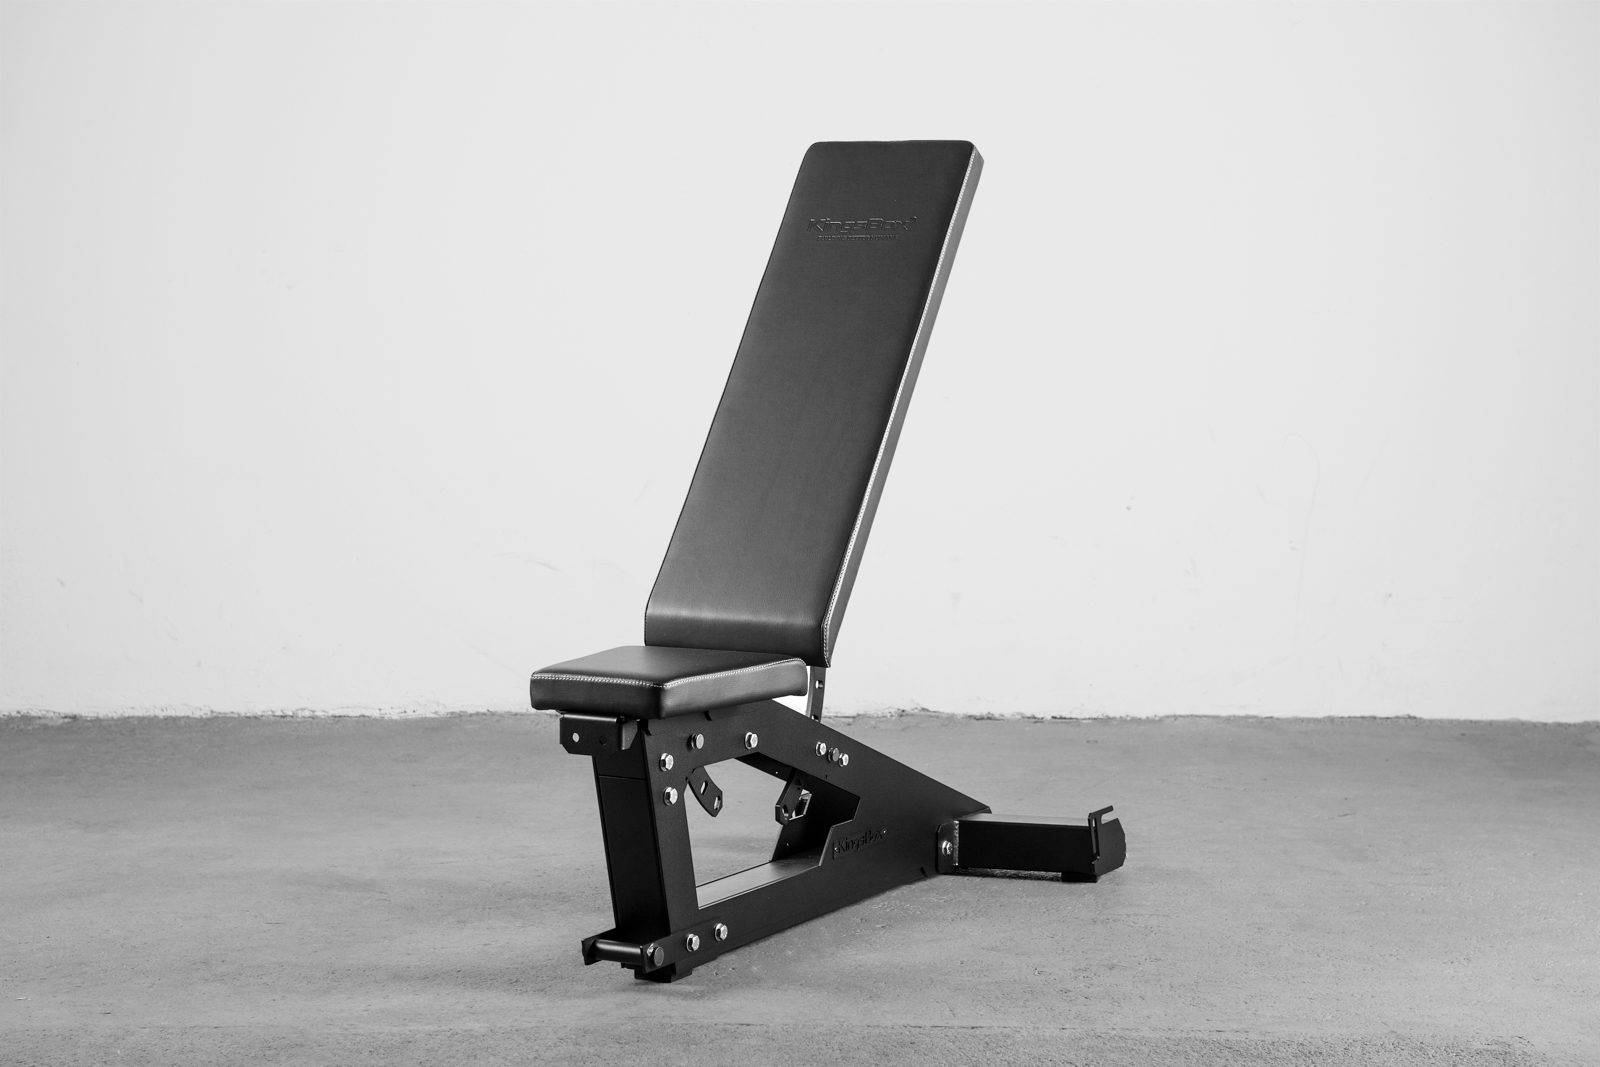 THE MAD THRONE ADJUSTABLE BENCH